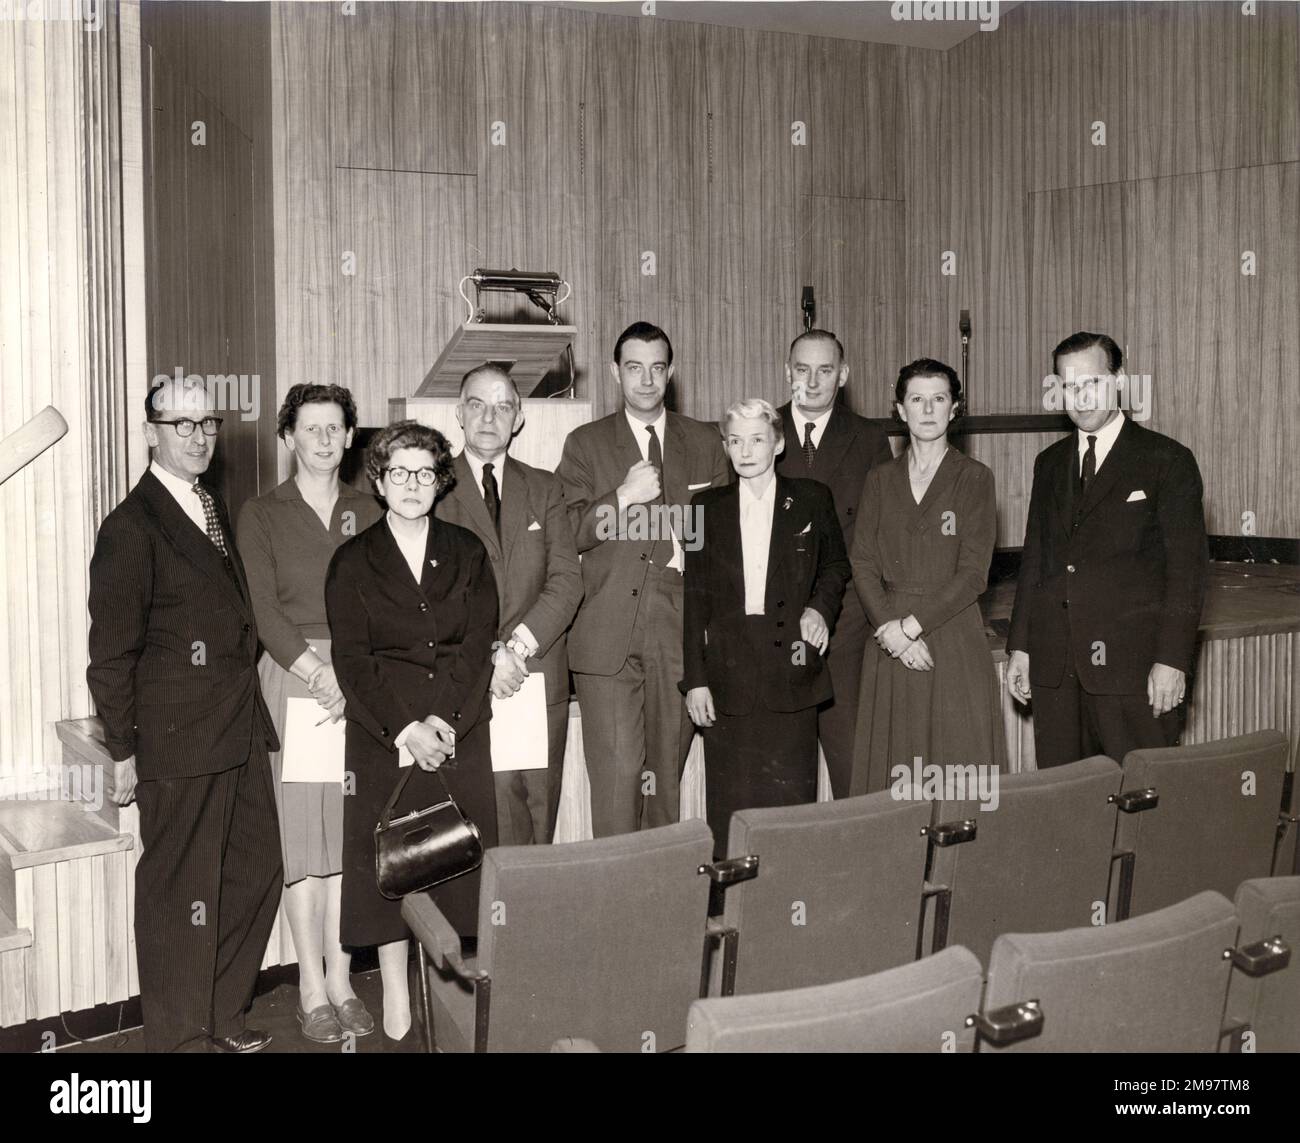 Senior staff at the opening of the Lecture Theatre in December 1960. From left: Frank H. Smith, Miss E.C. Pike, Miss Florence Barwood, Dr Archie Ballantyne, Dr A.J. Barrett, Mrs Joan Bradbrooke, Mr Deaton, Miss Rigby and Mr Lumsden. Stock Photo